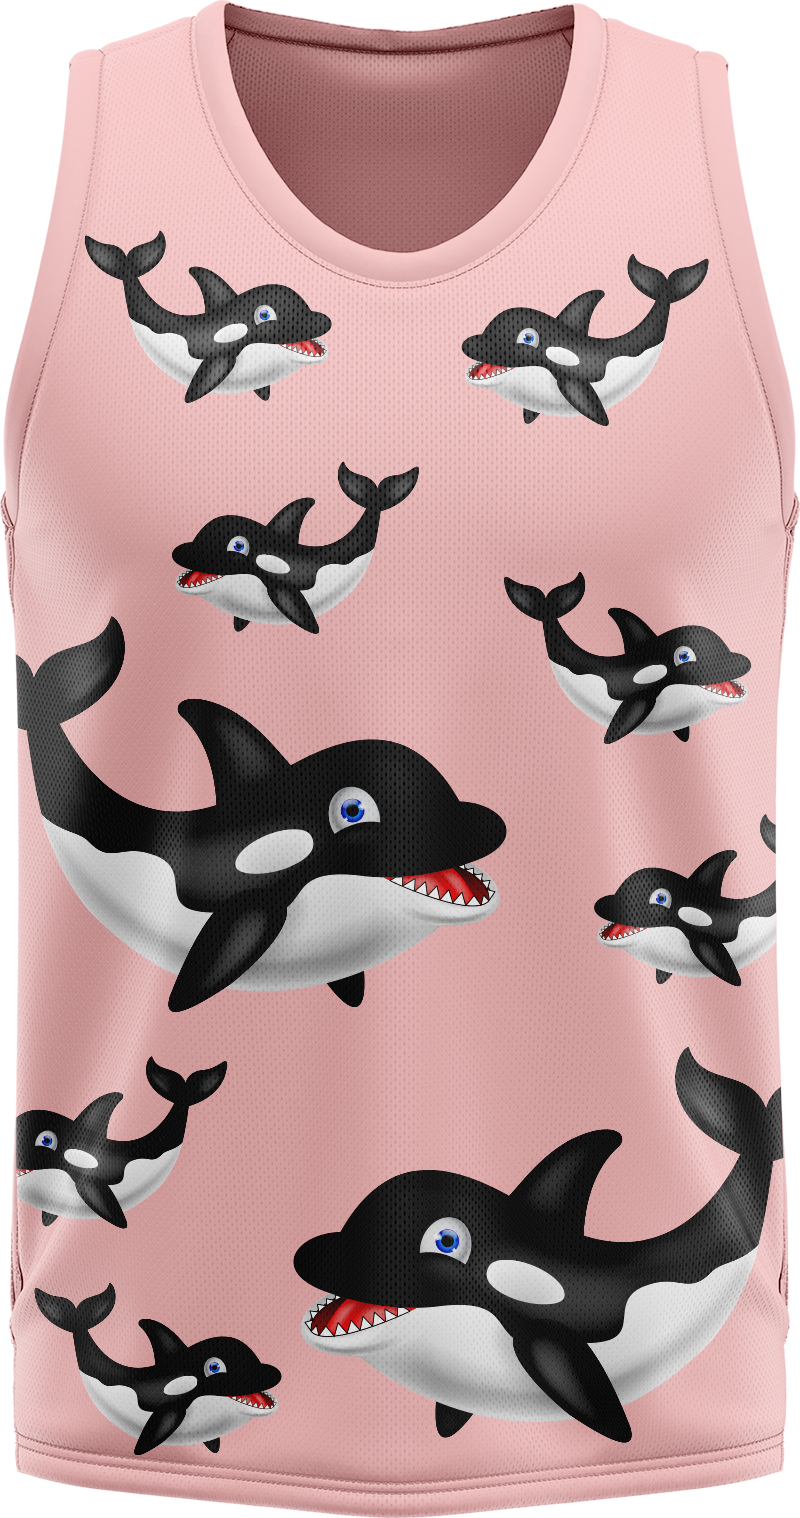 Orca Whale Basketball Jersey